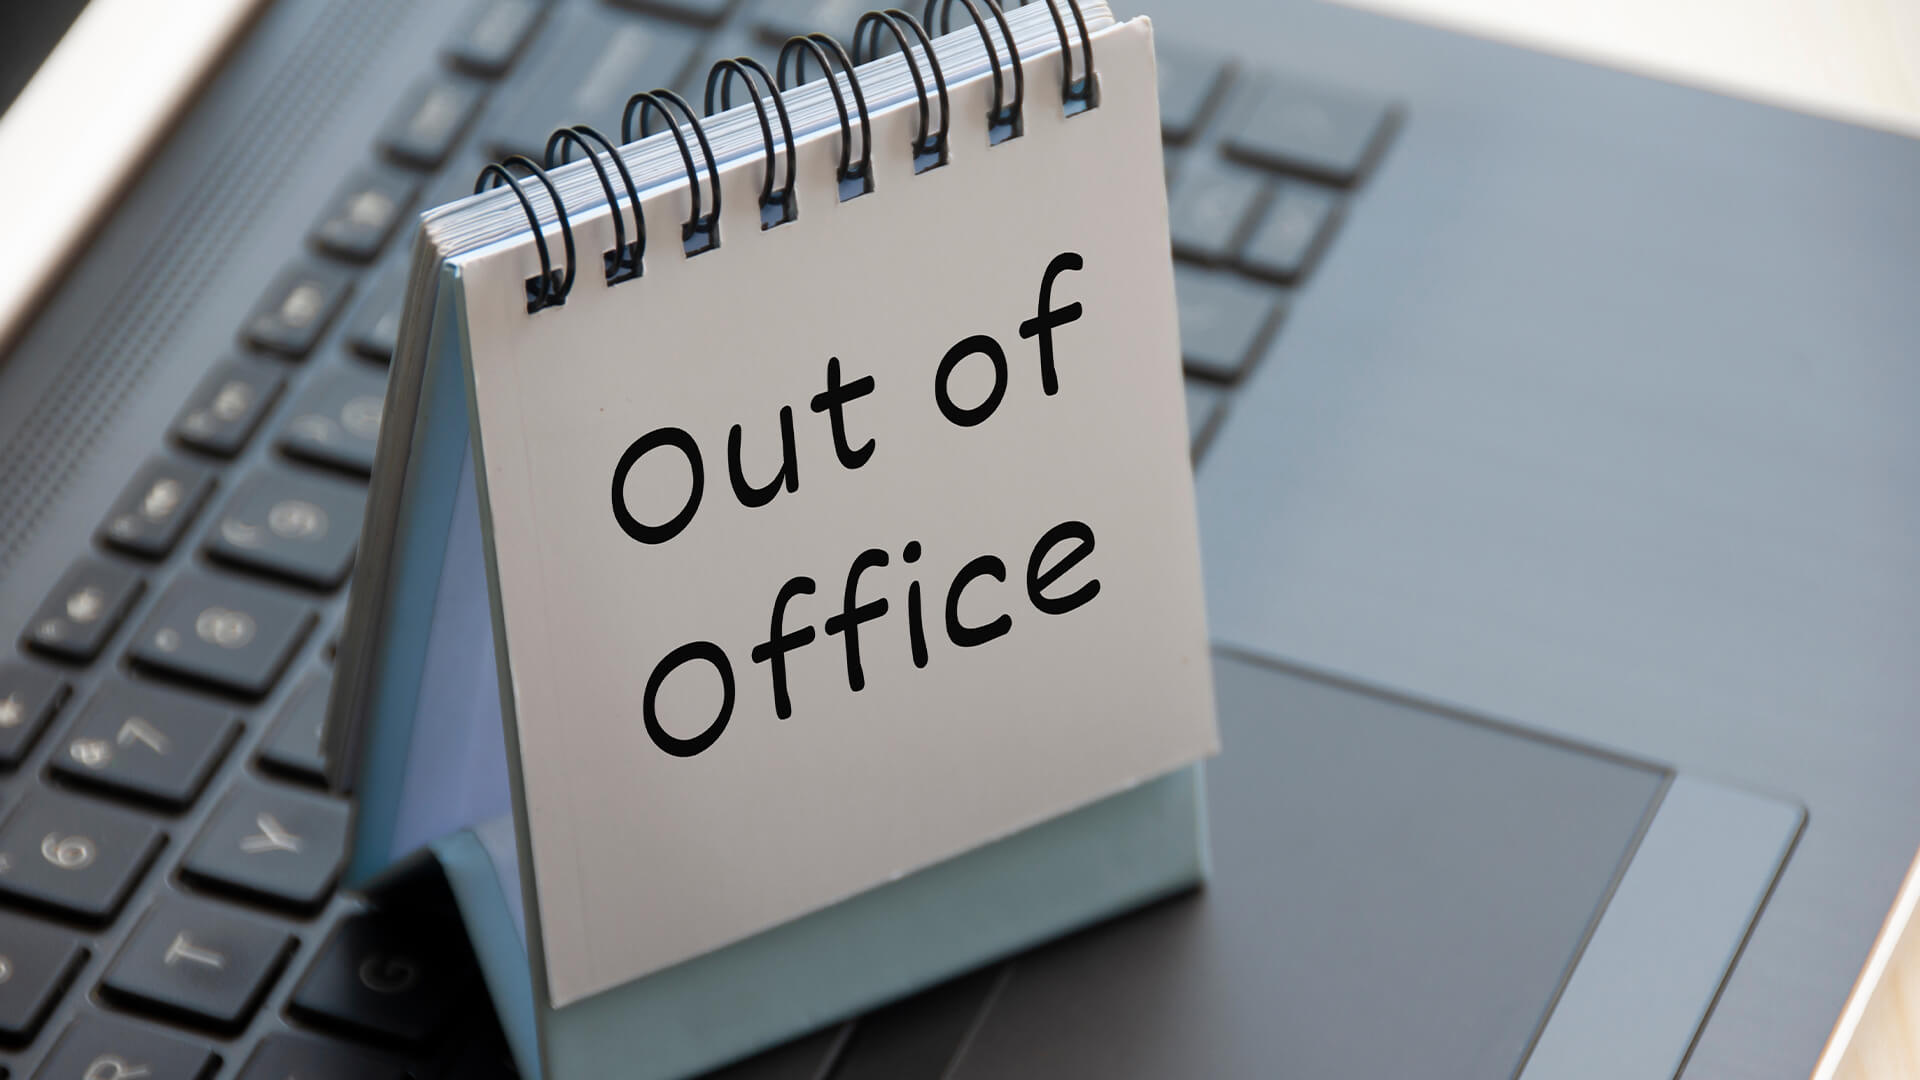 Out of office text on calendar desk on top of a laptop.